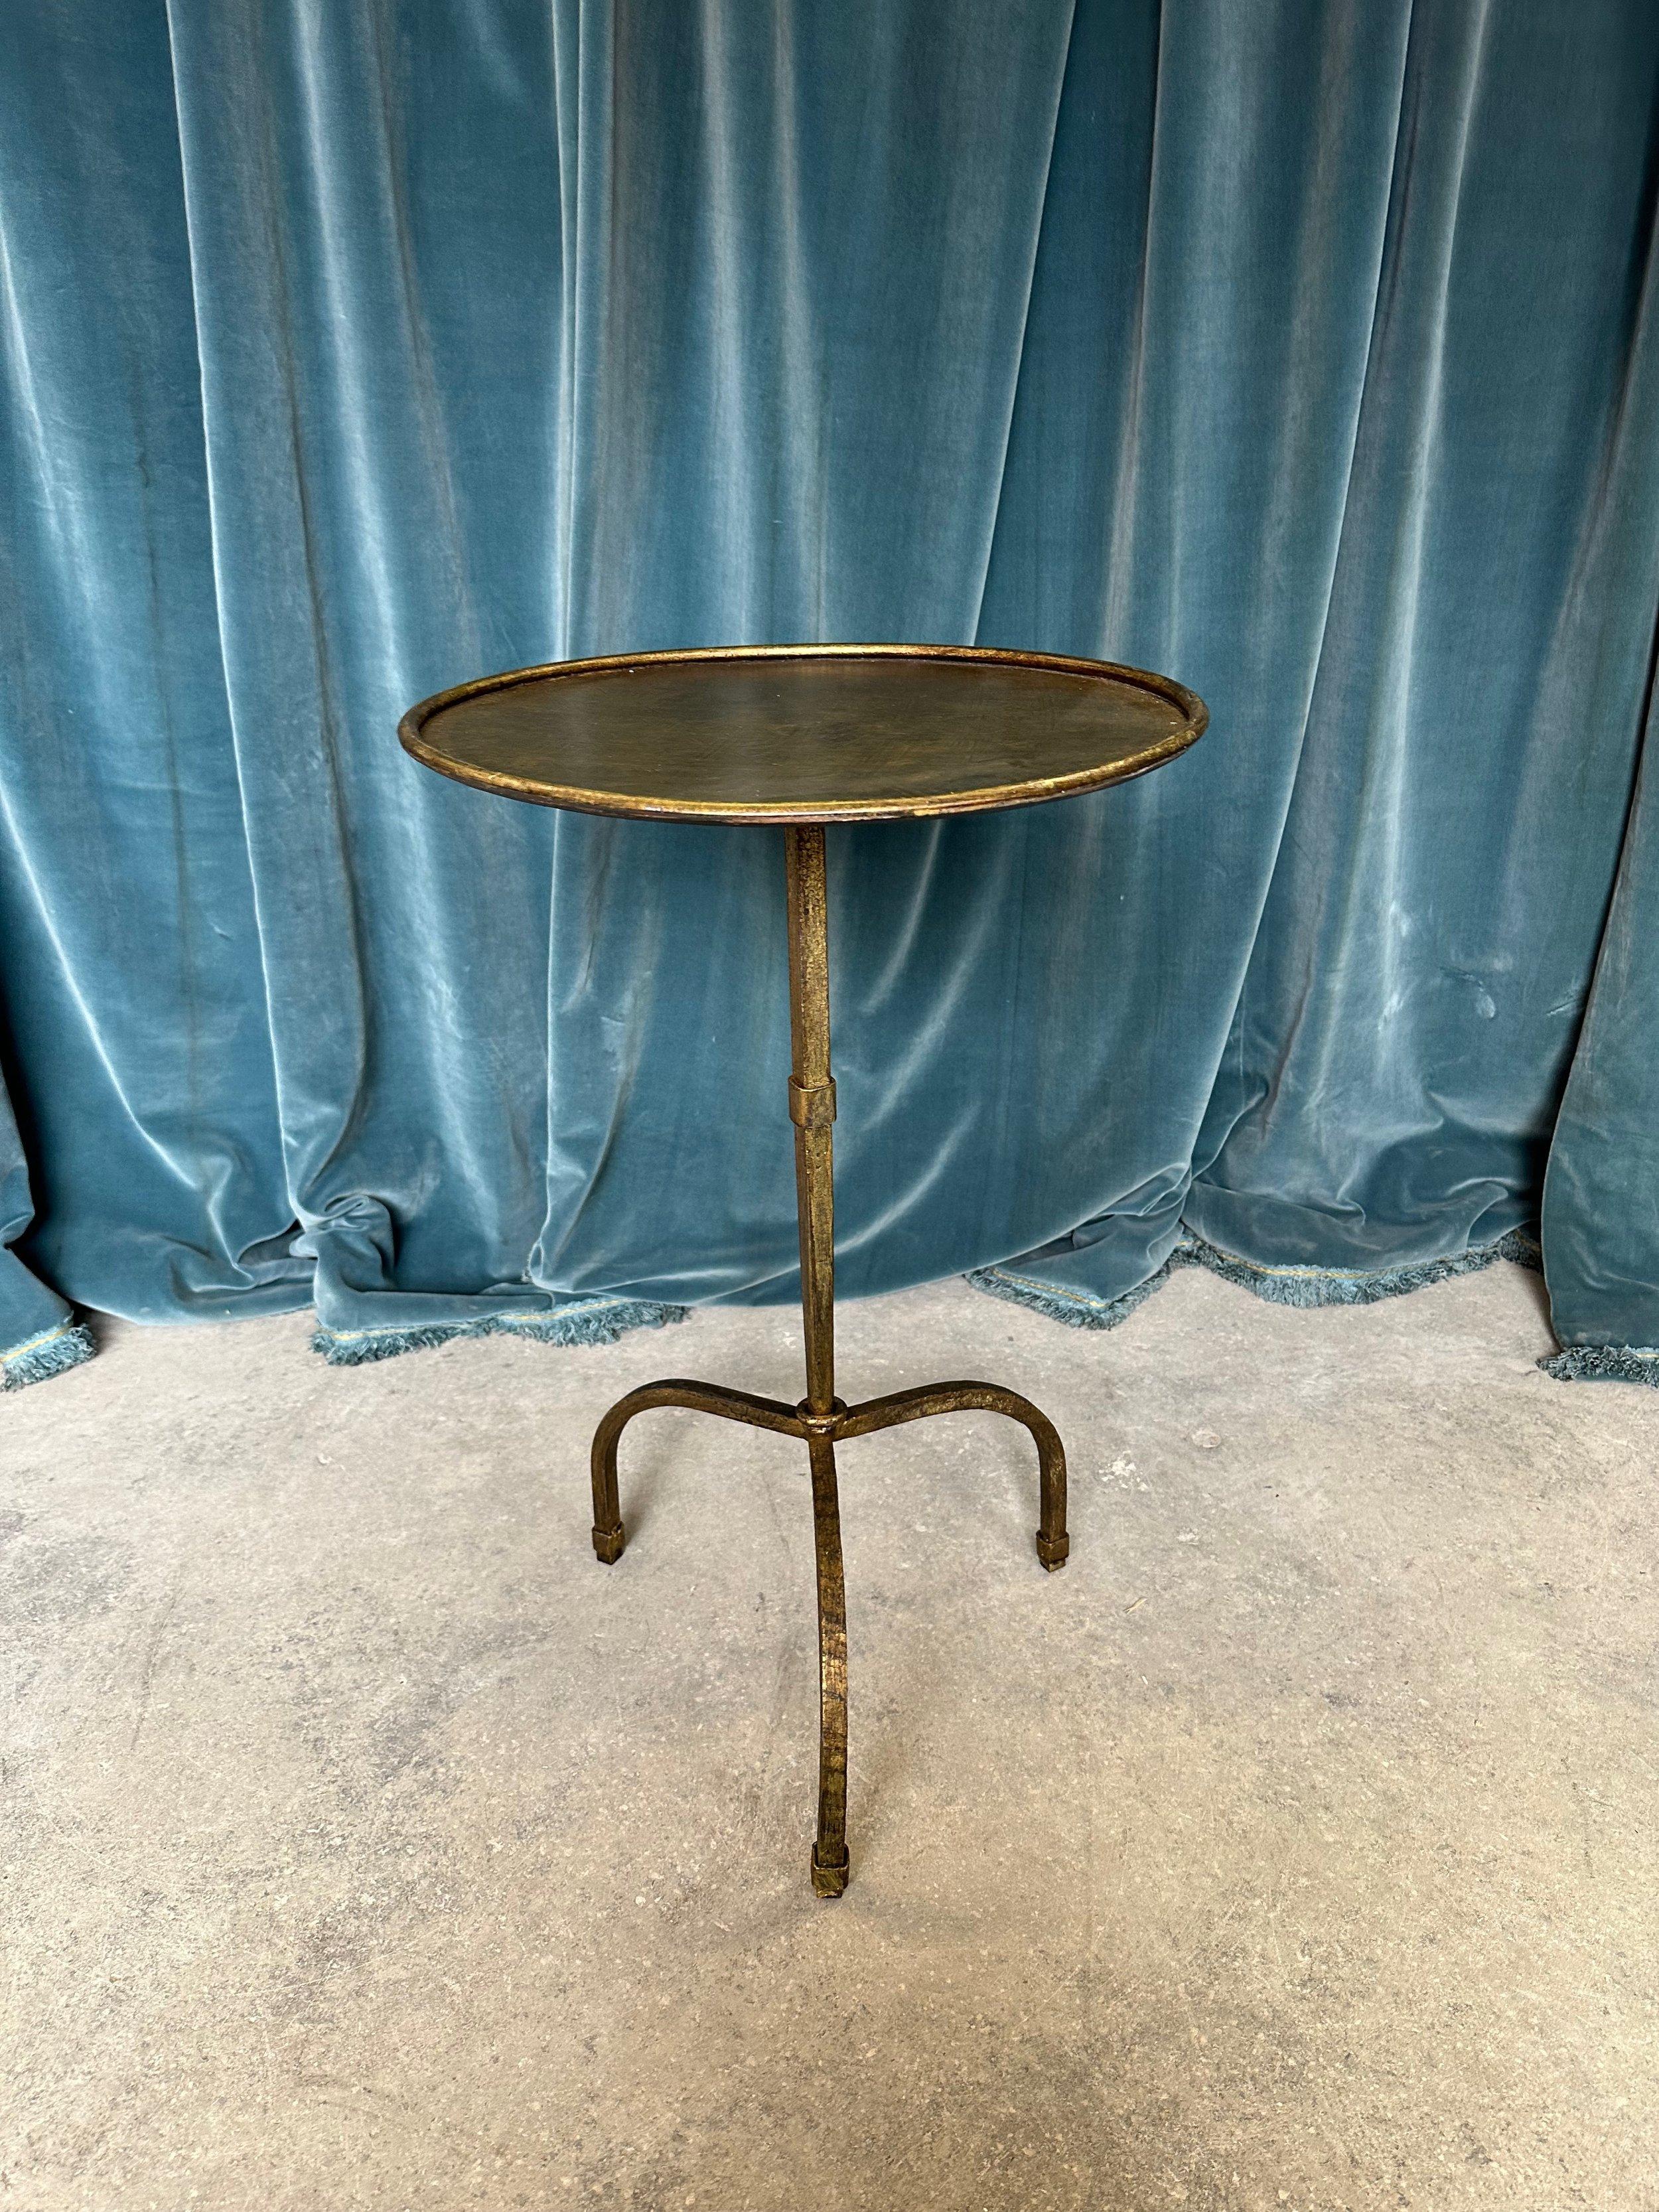 This recently crafted small Spanish iron end table is not only elegant but functional. Based on a vintage 1950s design, it features a circular central stem, highlighted by an intriguing collar accent that serves as a decorative enhancement. An